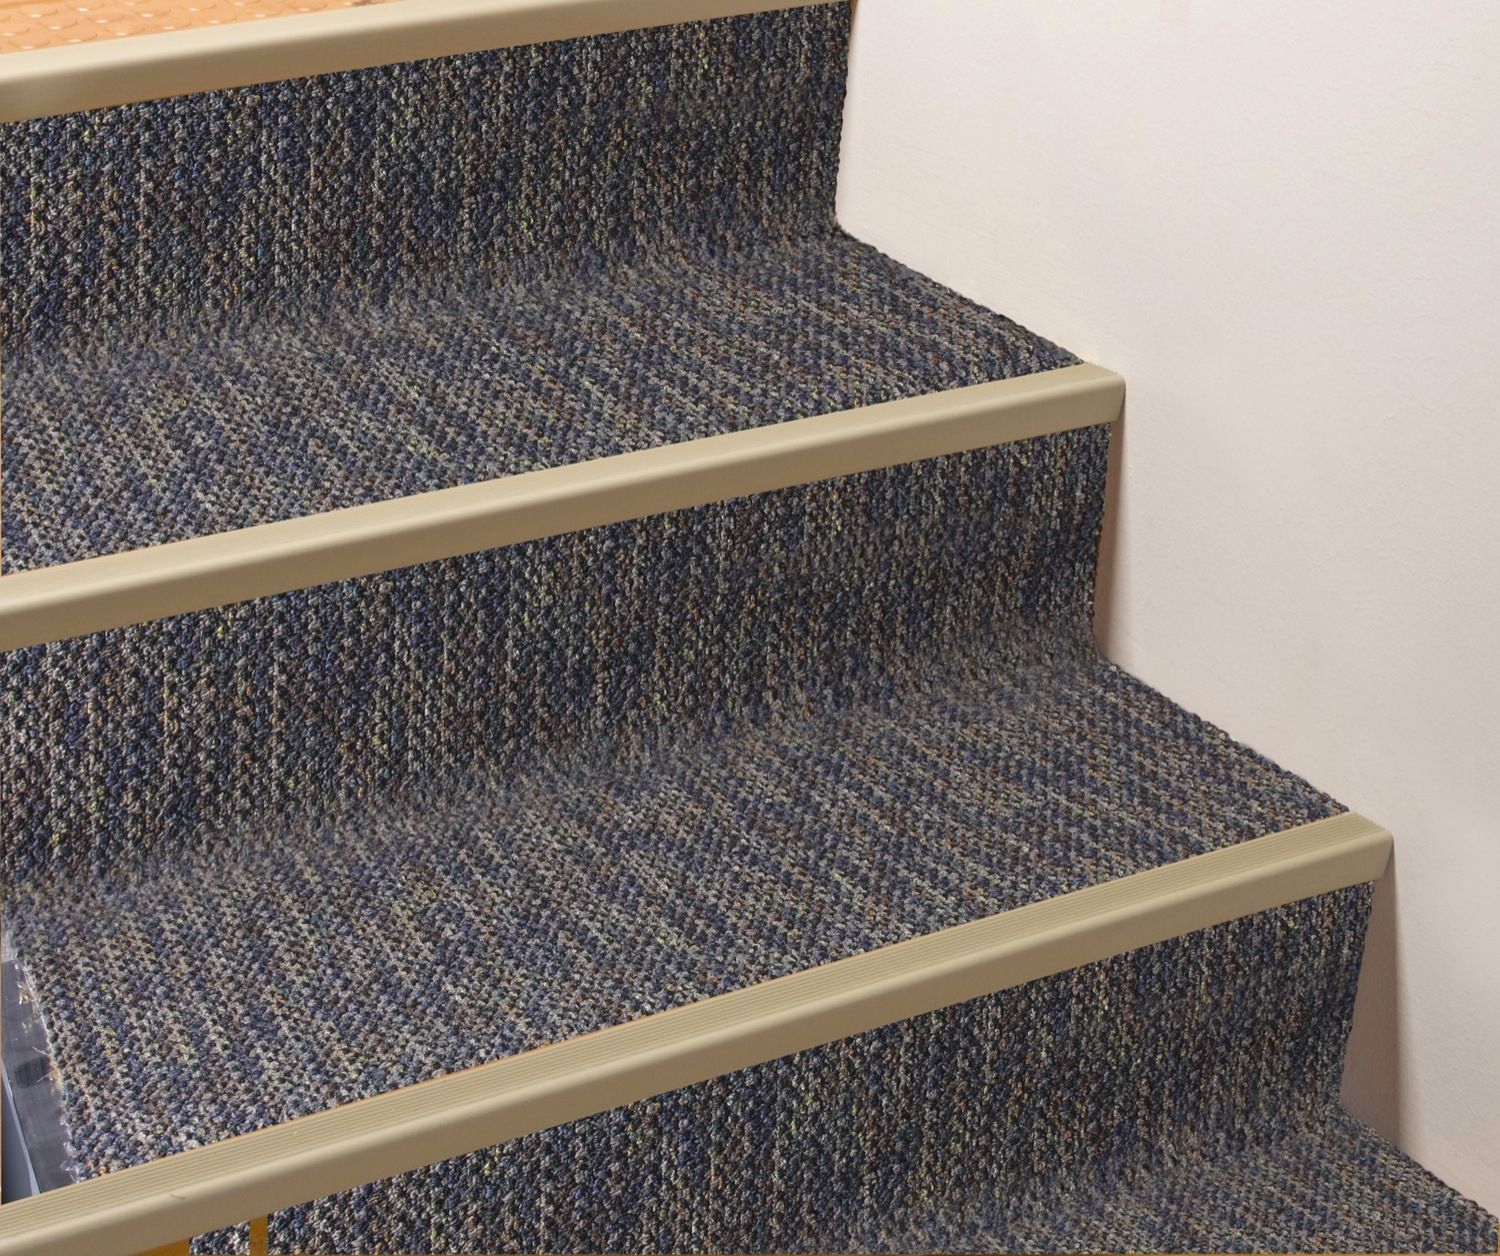 Top 15 Adhesive Carpet Strips for Stairs Stair Tread Rugs Ideas